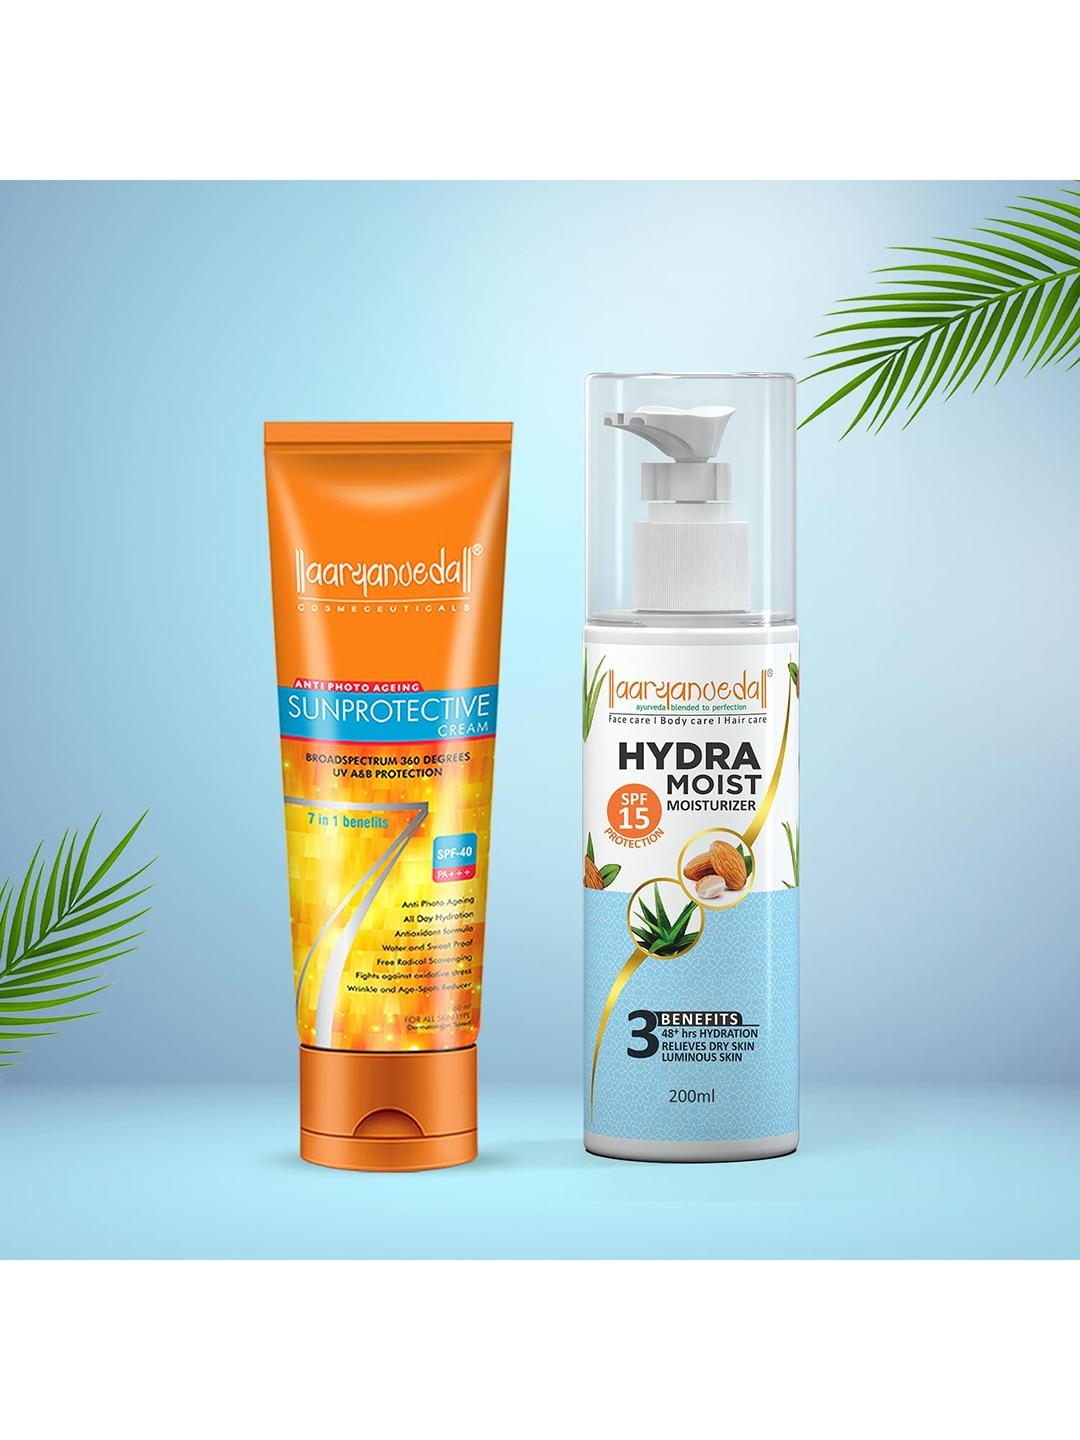 Aryanveda Sunscreen Spf 40 PA+++ With Hydra Moisturizer spf 15 For Sunprotective 260g each